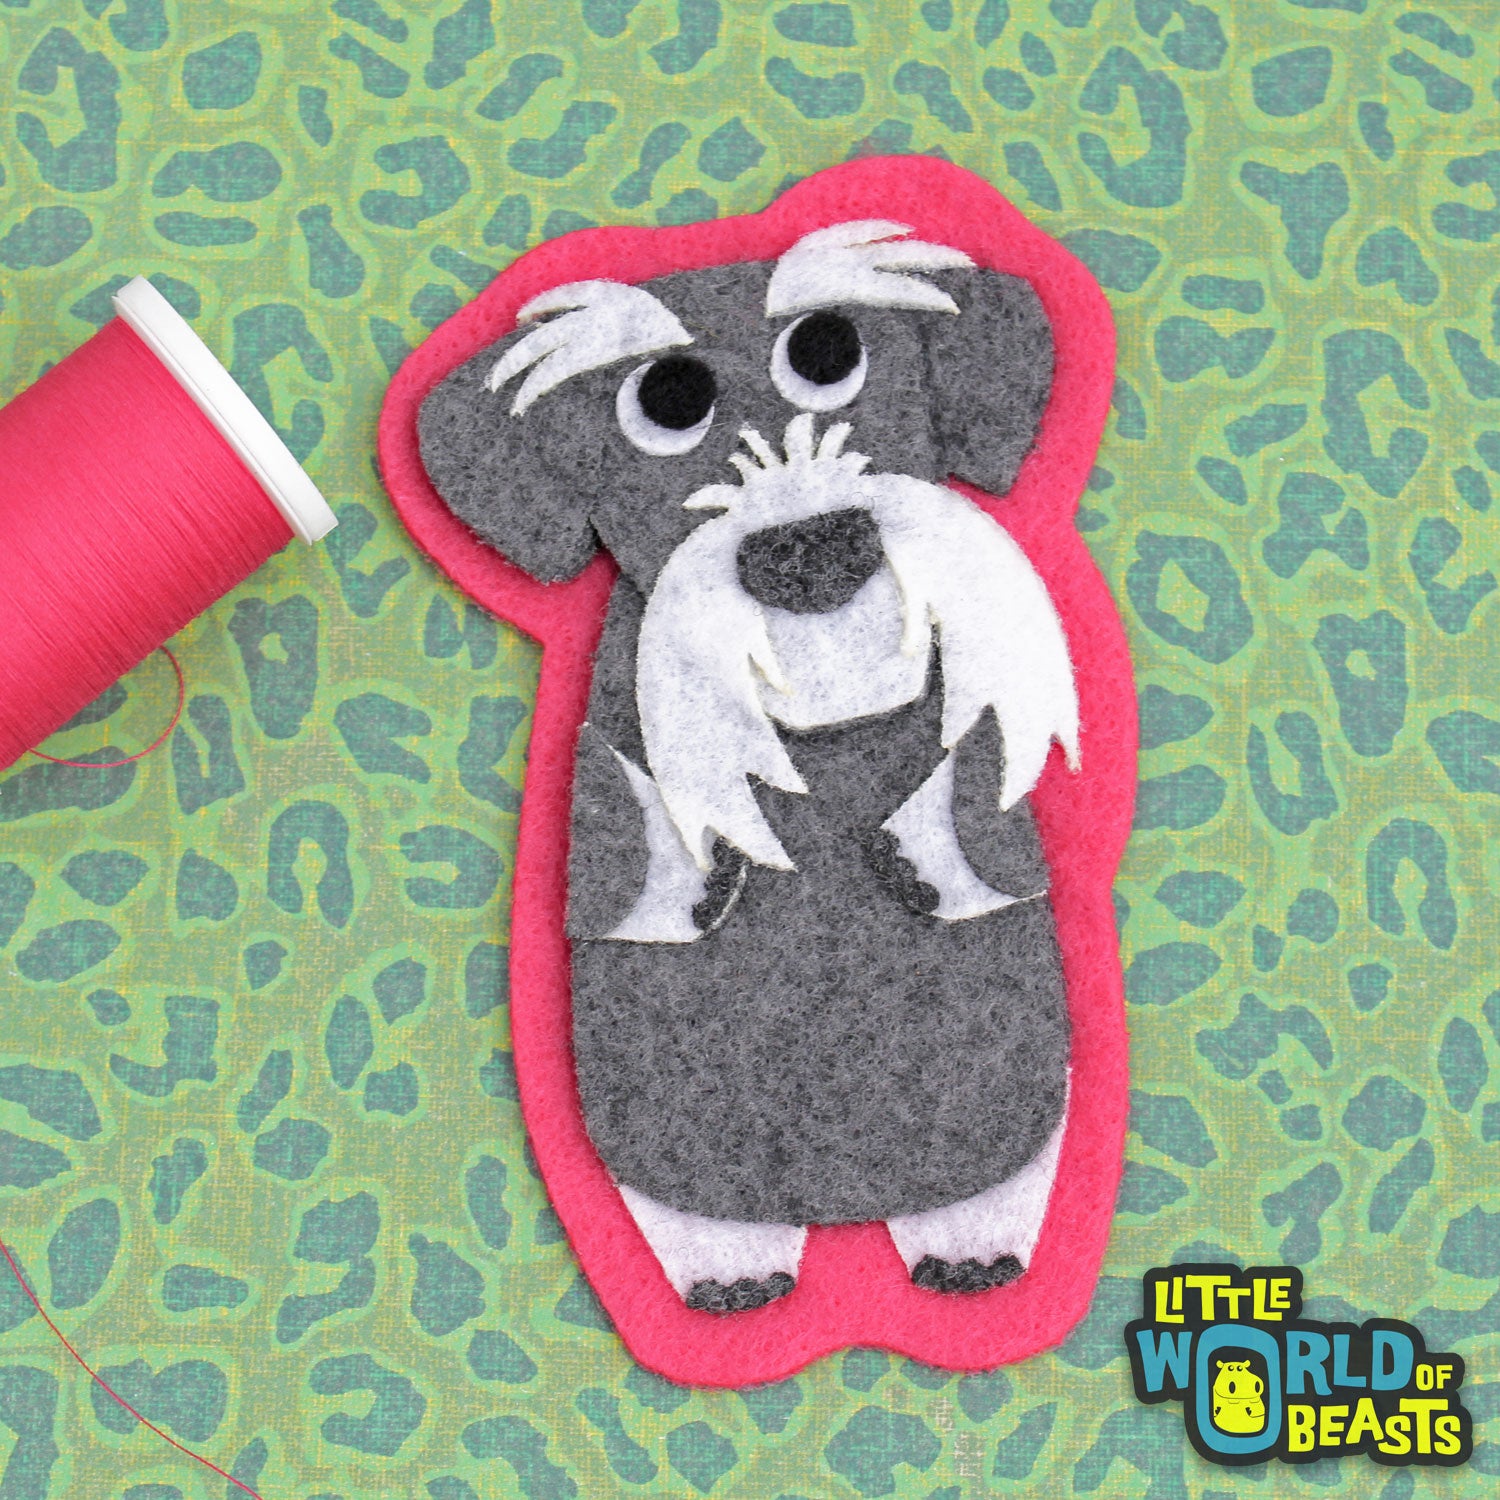 Giles the Schnauzer Patch - Sew On or Iron On Felt Dog Applique